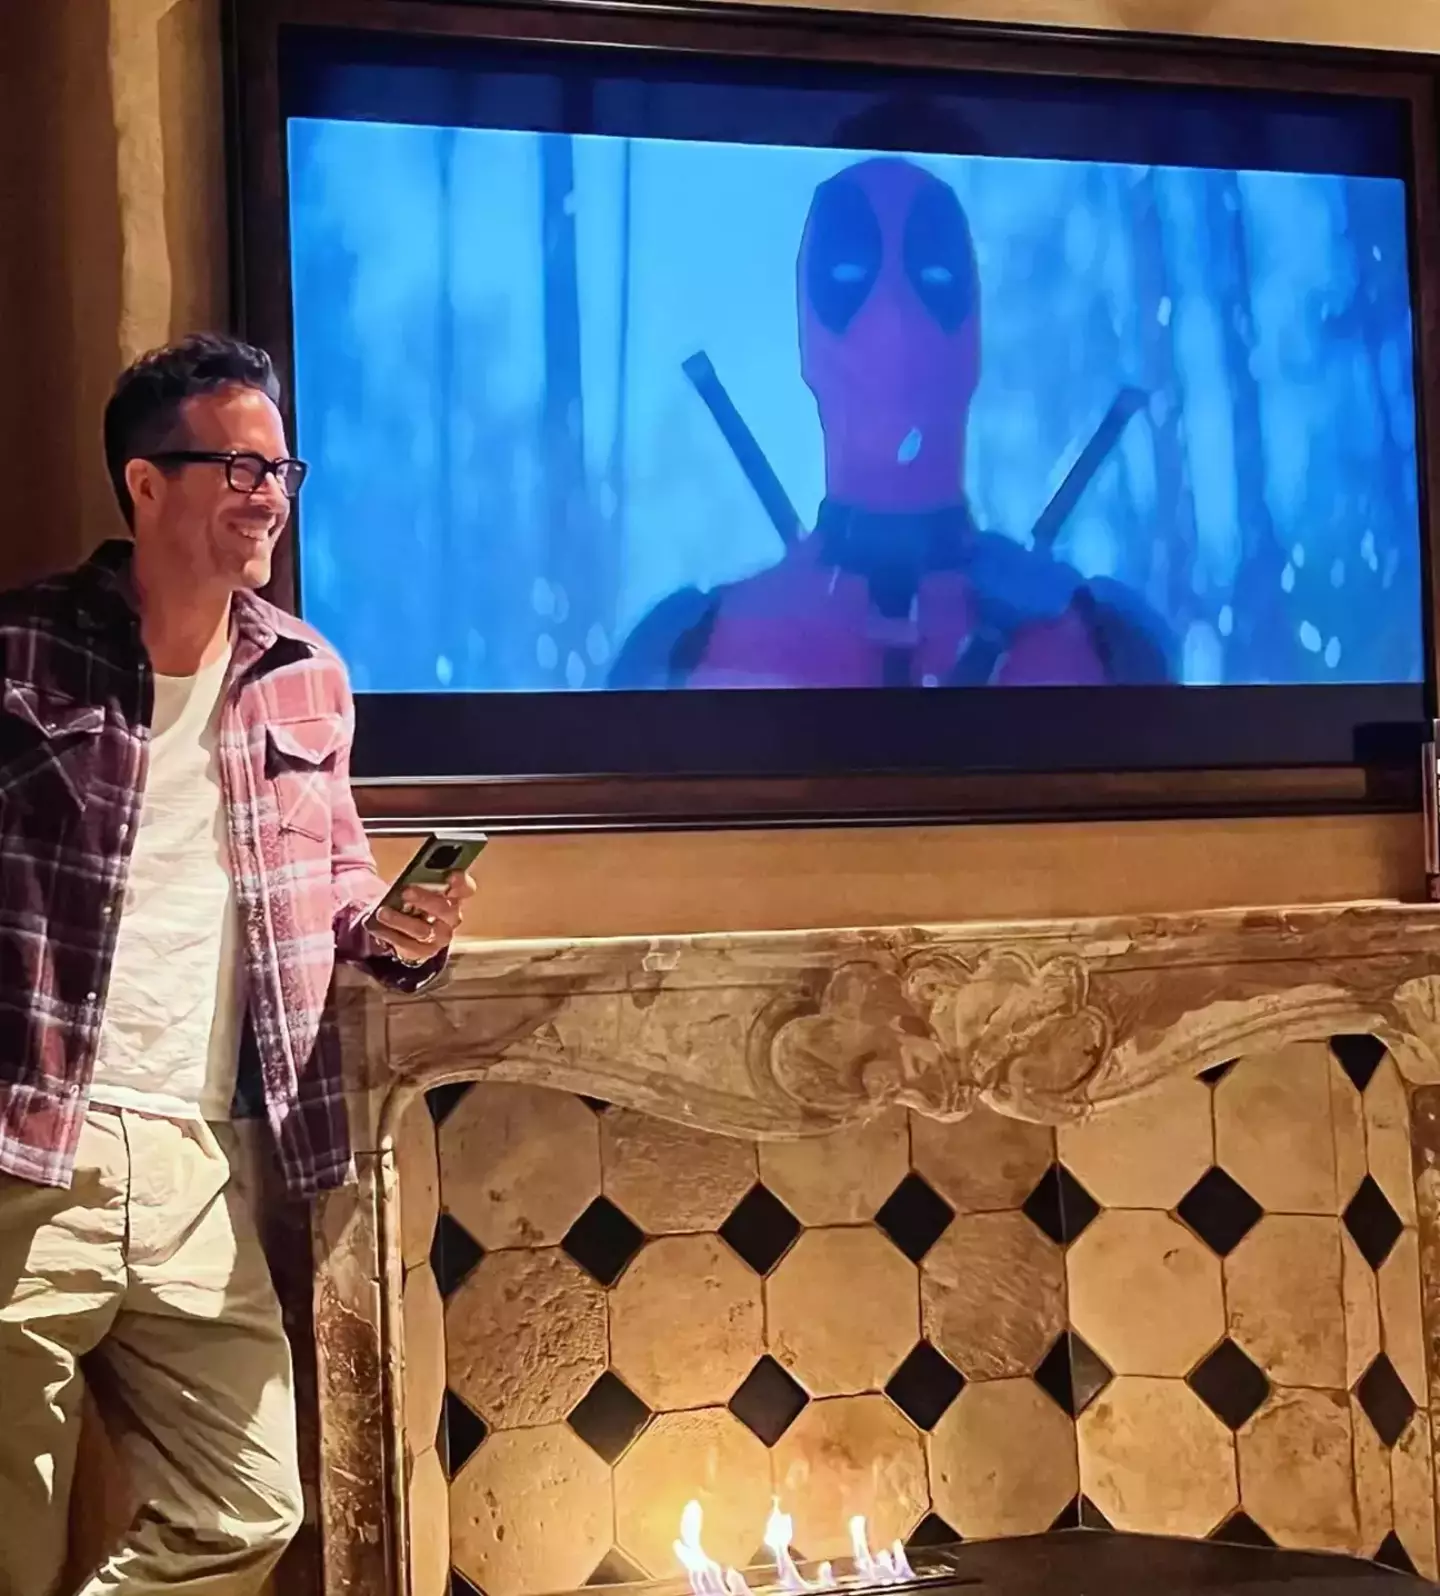 The Deadpool star delivered a hilarious troll to his wife, Blake Lively, during the Super Bowl.